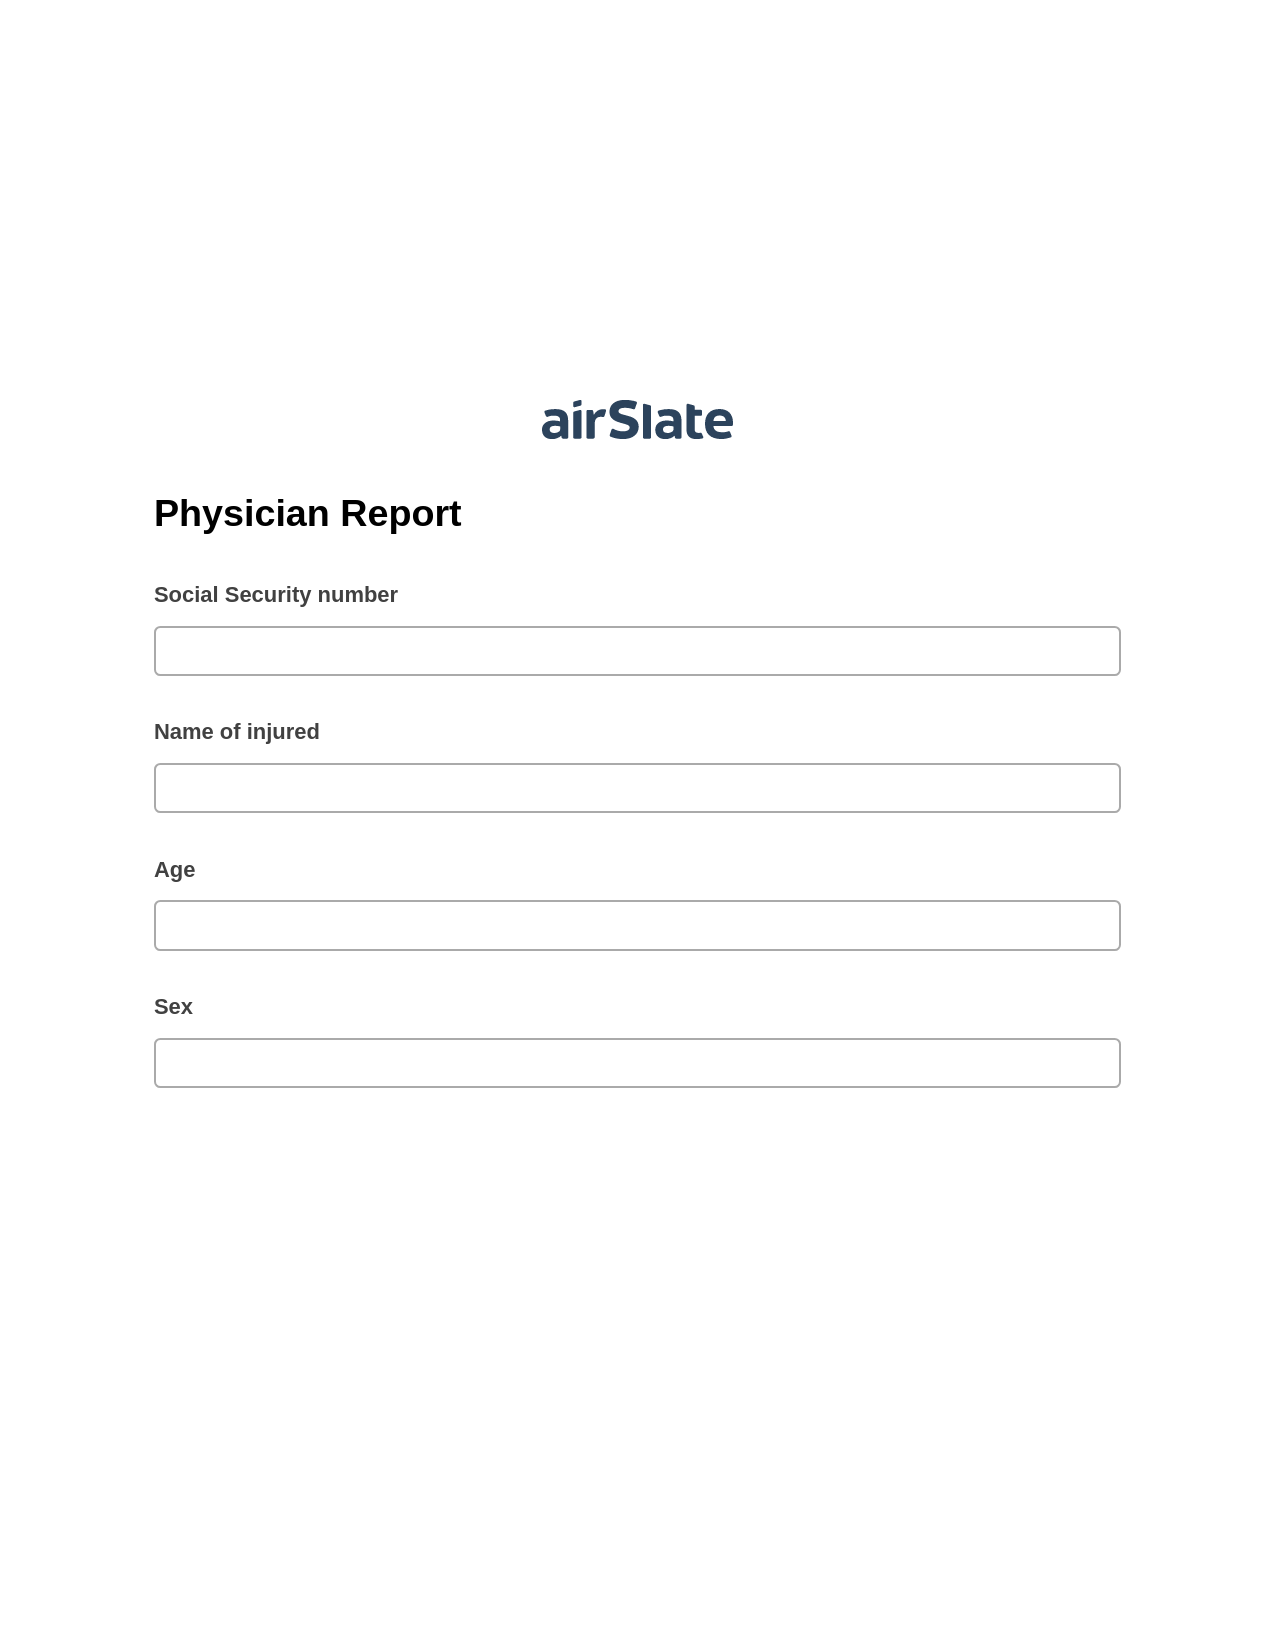 Physician Report Pre-fill from MS Dynamics 365 Records, Update MS Dynamics 365 Record Bot, Slack Notification Postfinish Bot